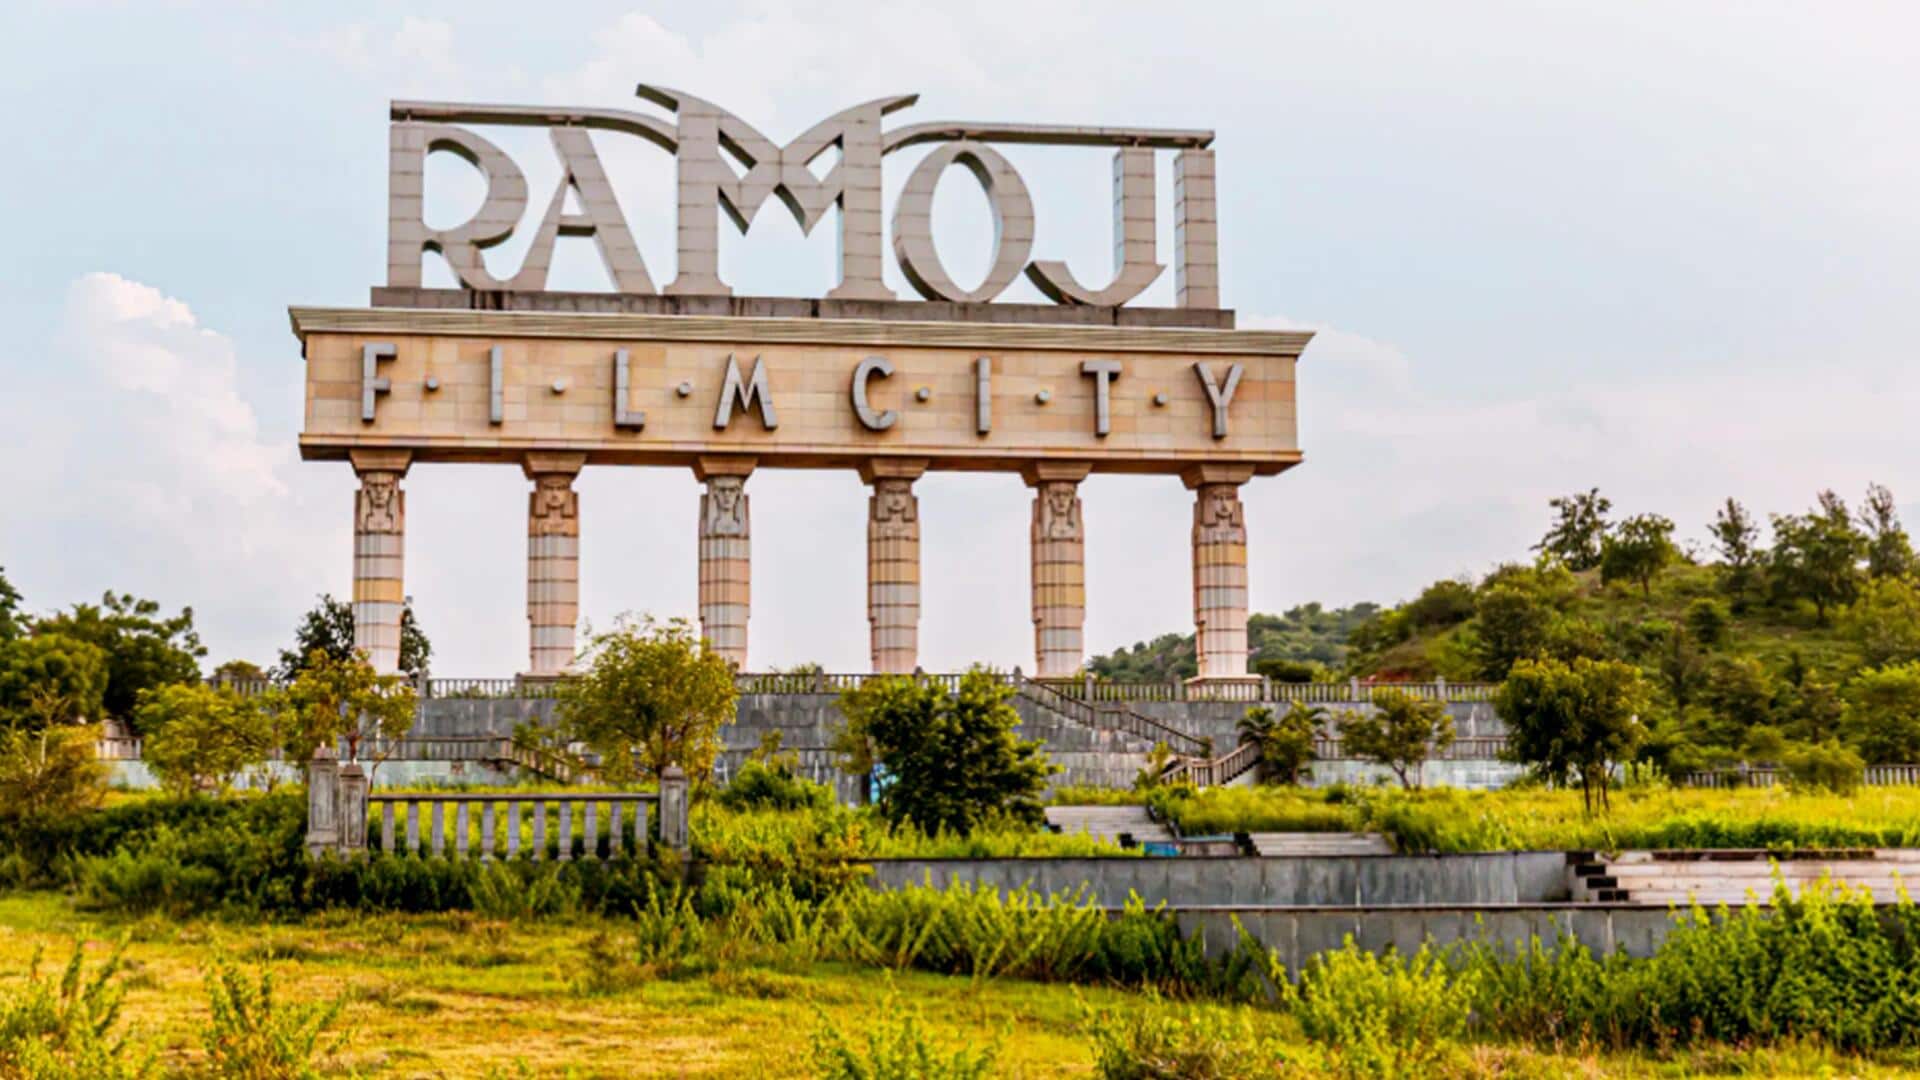 Explainer: Why Ramoji Film City is significant to Indian cinema